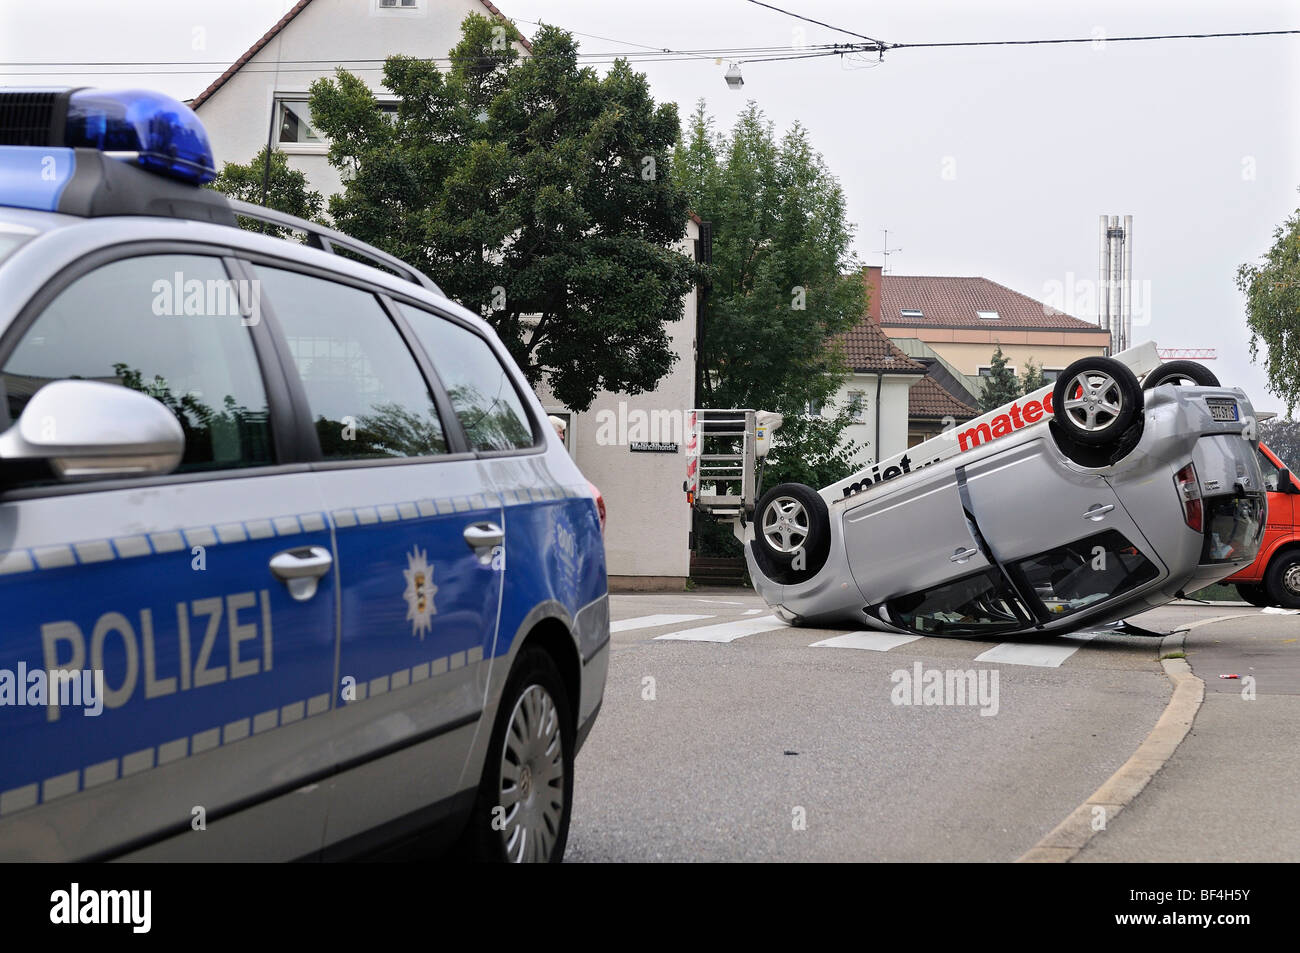 Daihatsu car having rolled over in a traffic accident, lying on its roof, patrol car in the foreground, Stuttgart, Baden-Wuertt Stock Photo